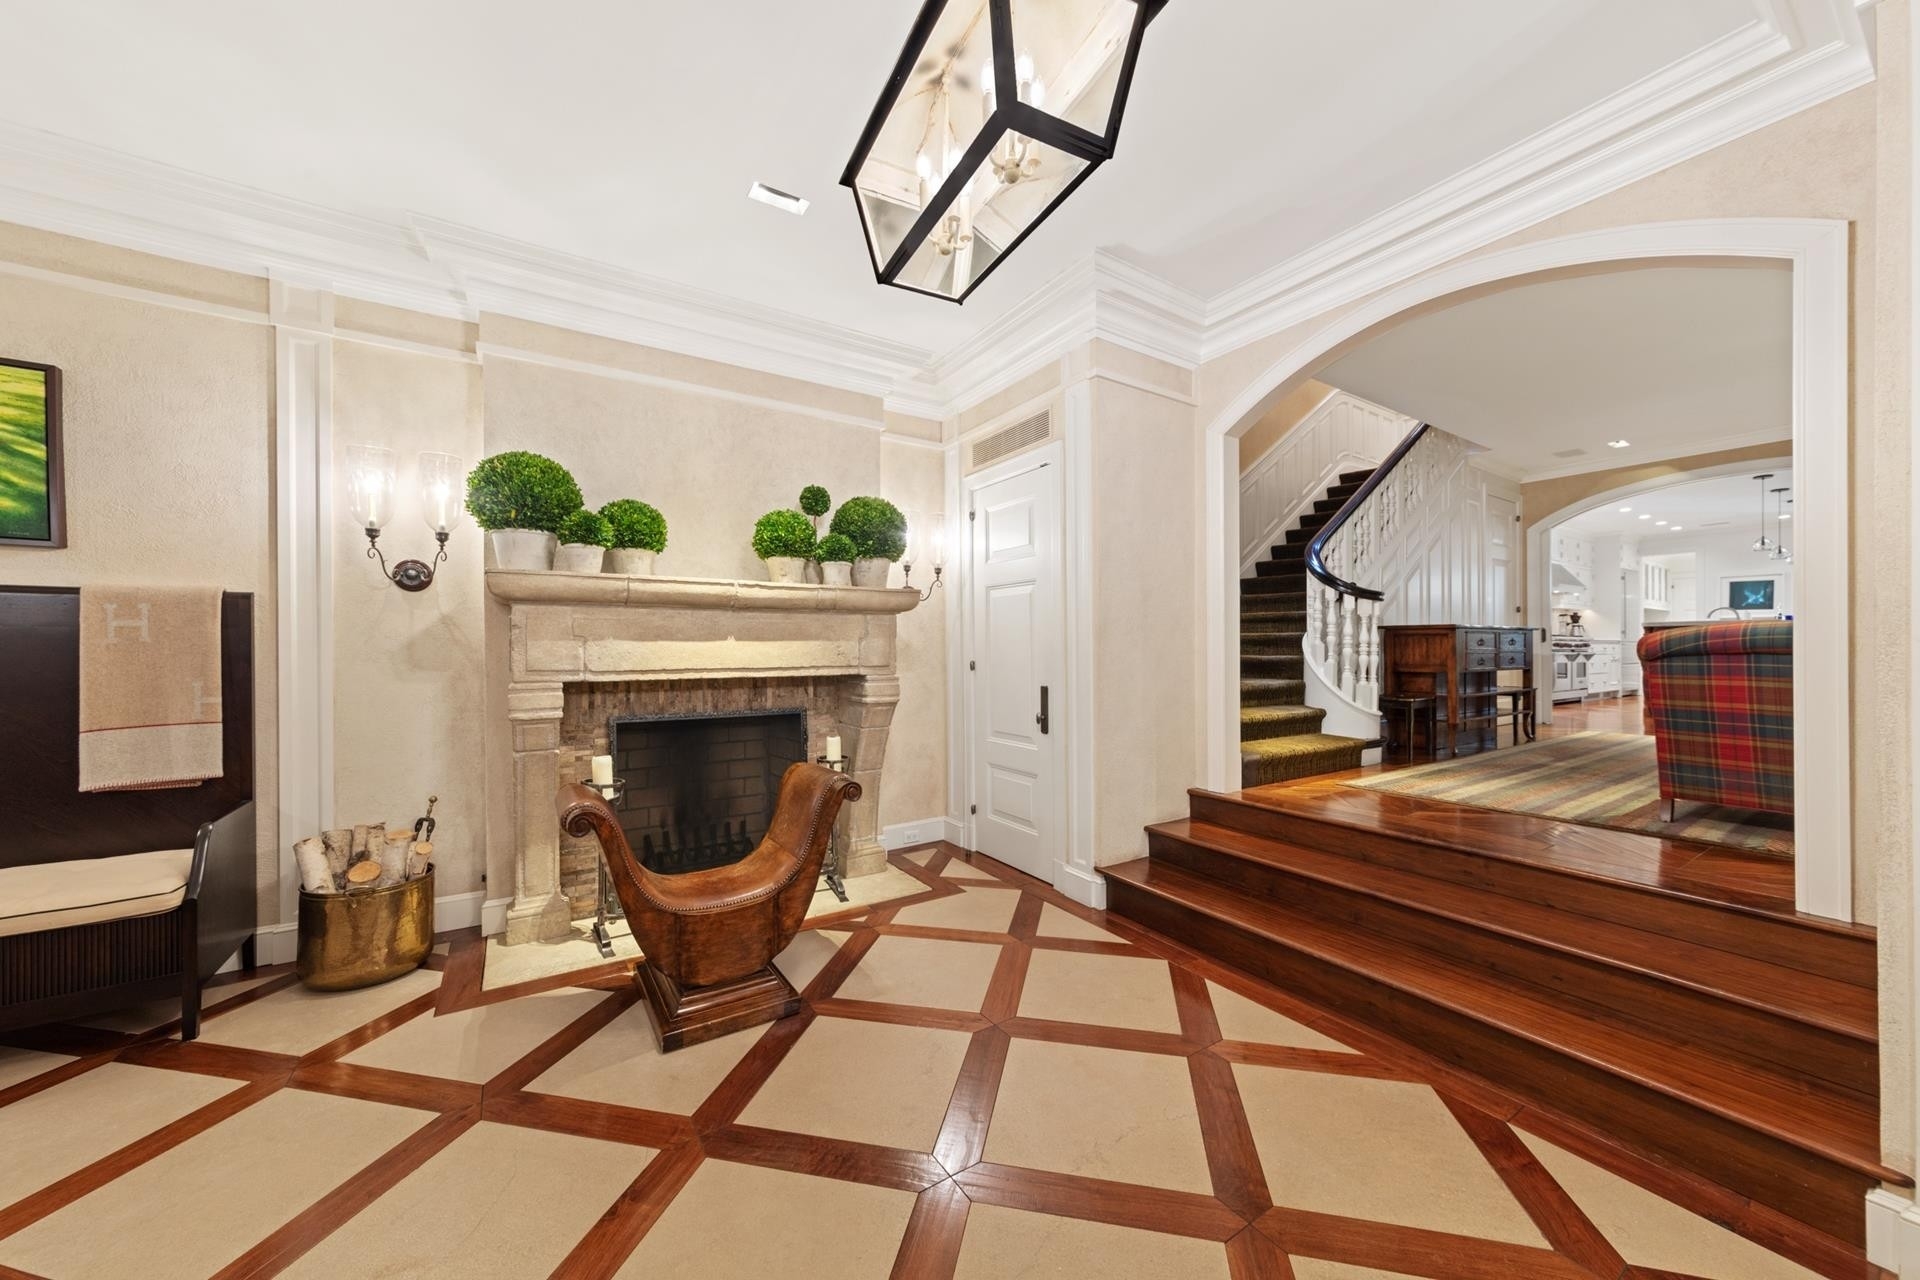 Single Family Townhouse for Sale at 20 E 94TH ST , TOWNHOUSE Carnegie Hill, New York, New York 10128